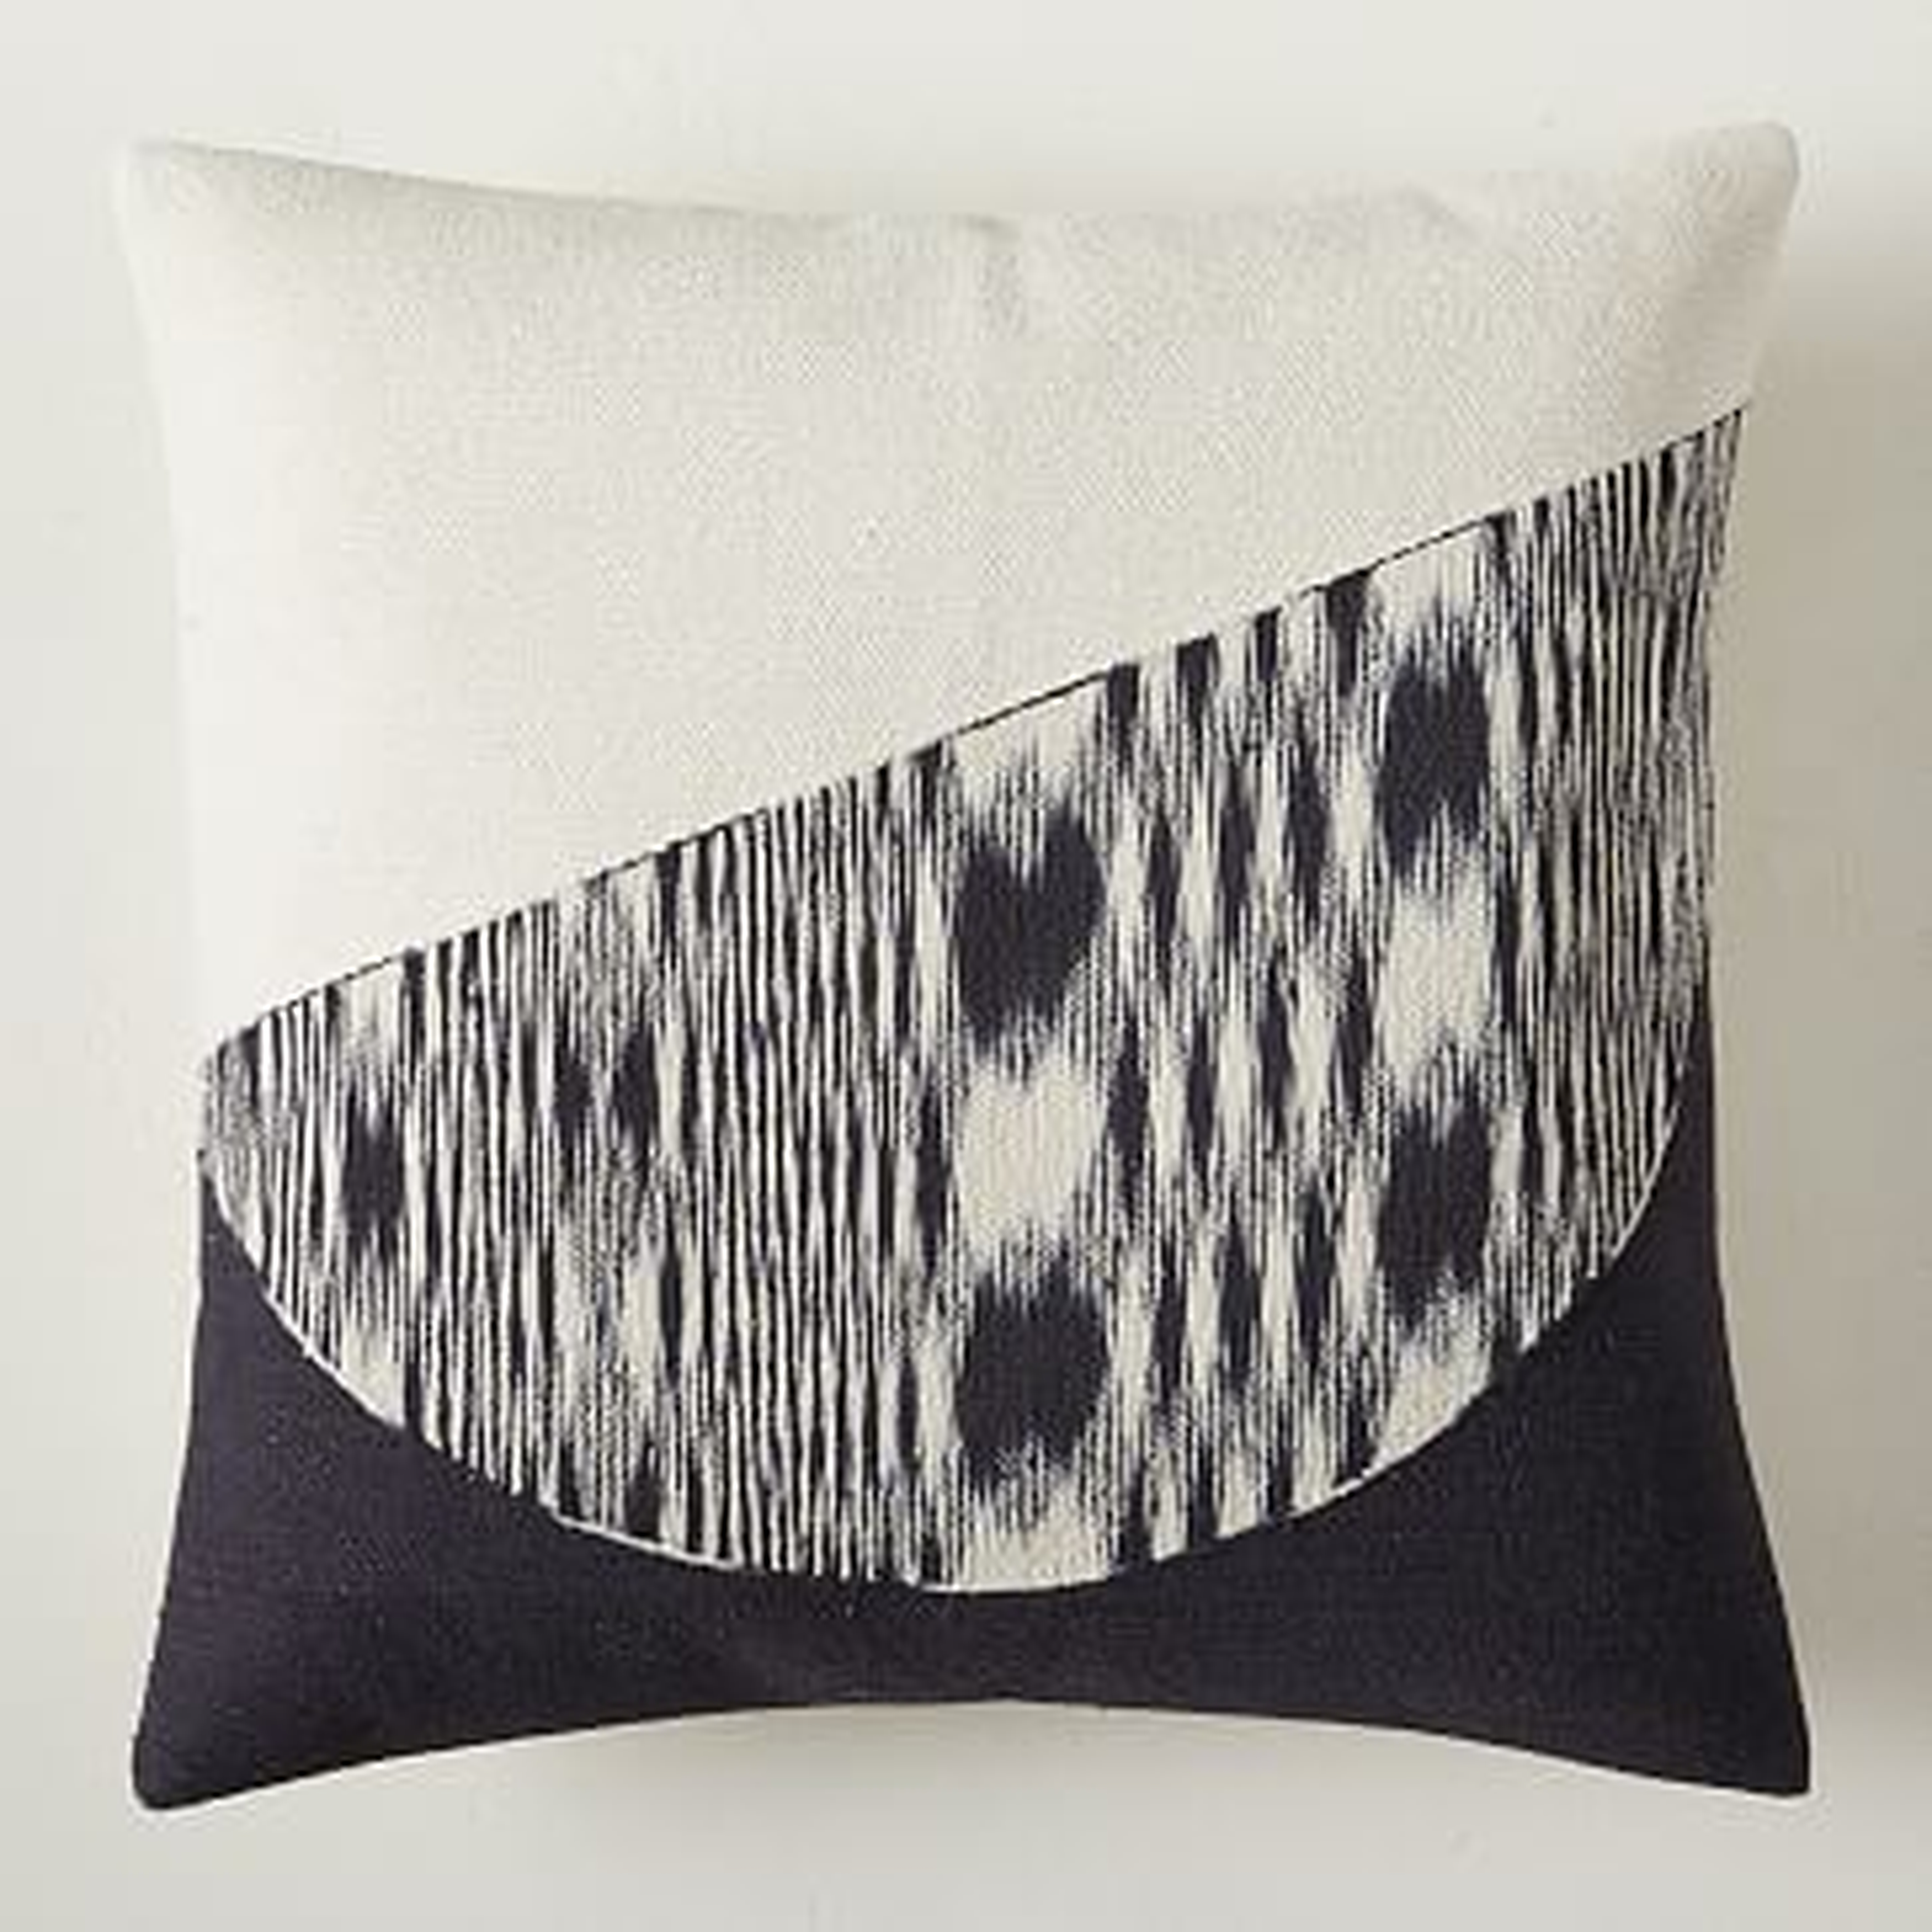 Shadow Graphic Pillow Cover, 20"x20", Black, Set of 2 - West Elm